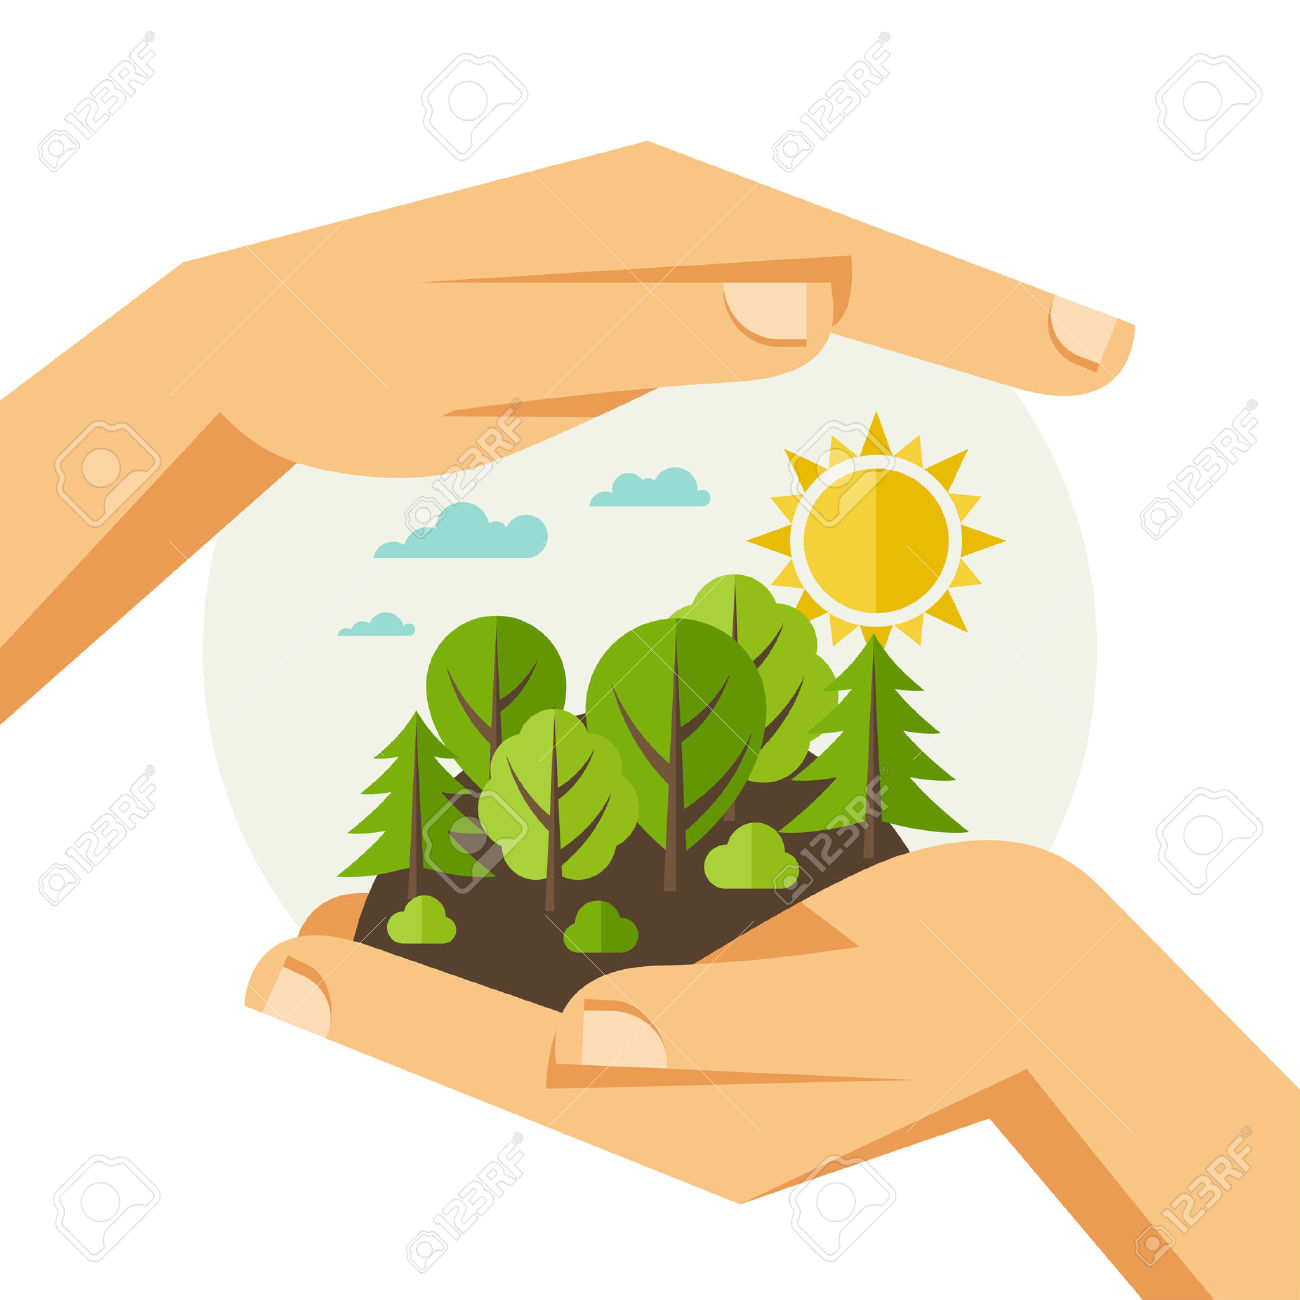 50,182 Environmental Protection Stock Vector Illustration And.